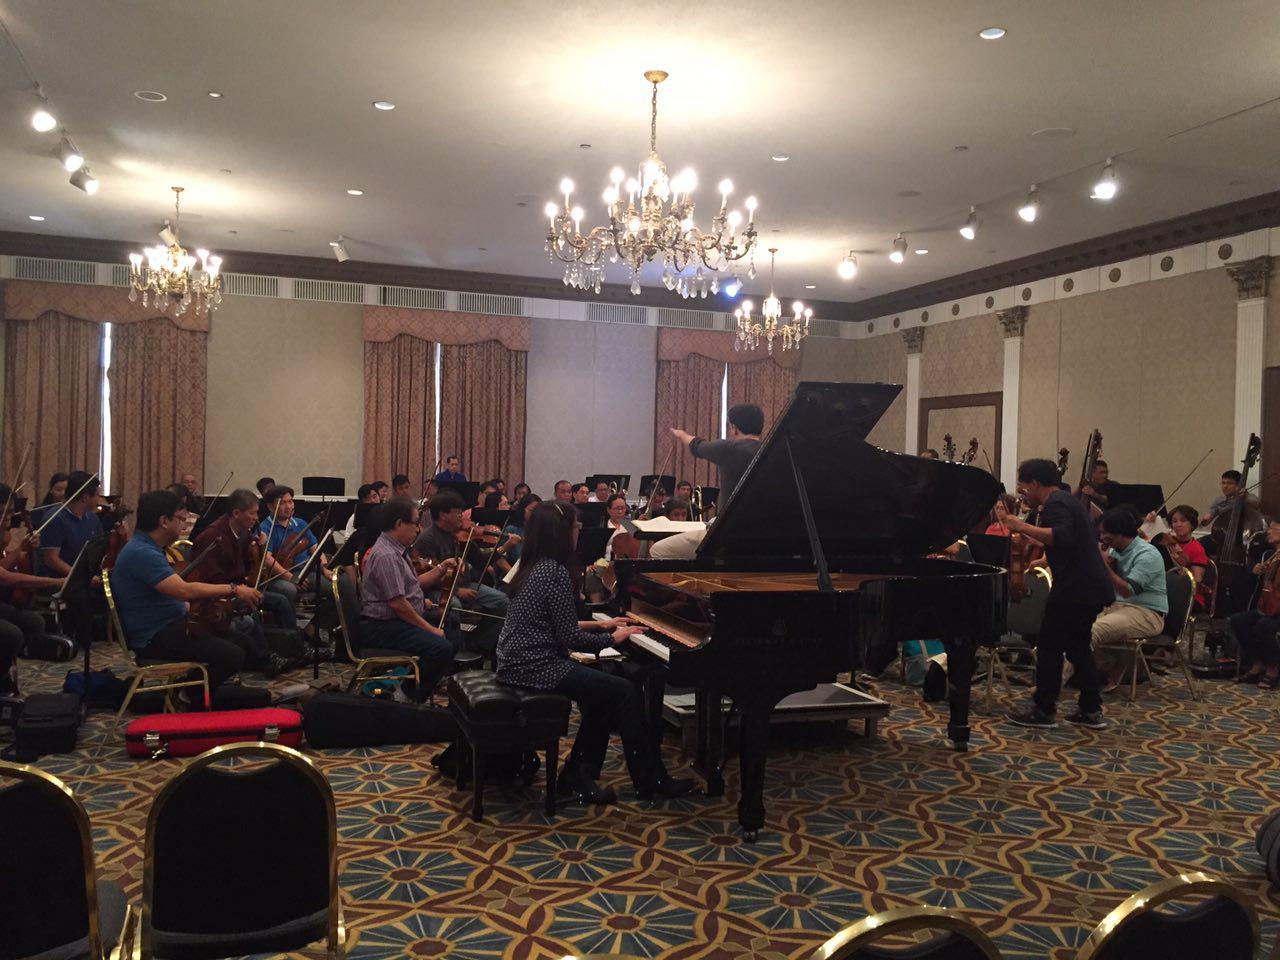 Members of the Philippine Philharmonic Orchestra prepare for their historic debut performance at Carnegie Hall in New York.